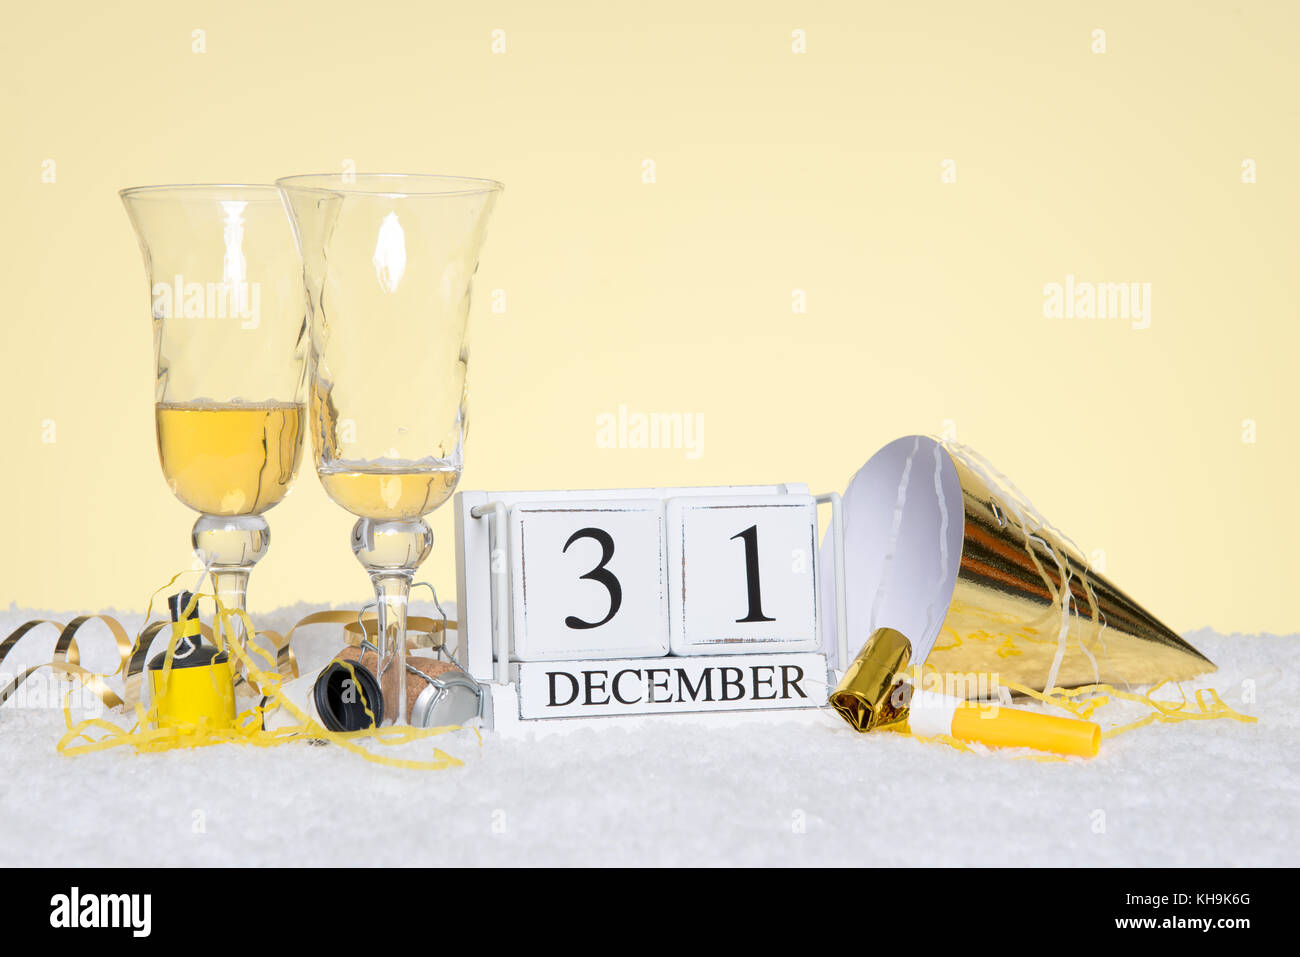 New Year party still life with two empty glasses of Champagne and a date block showing 31st December with streamers. Copy space on the background for  Stock Photo